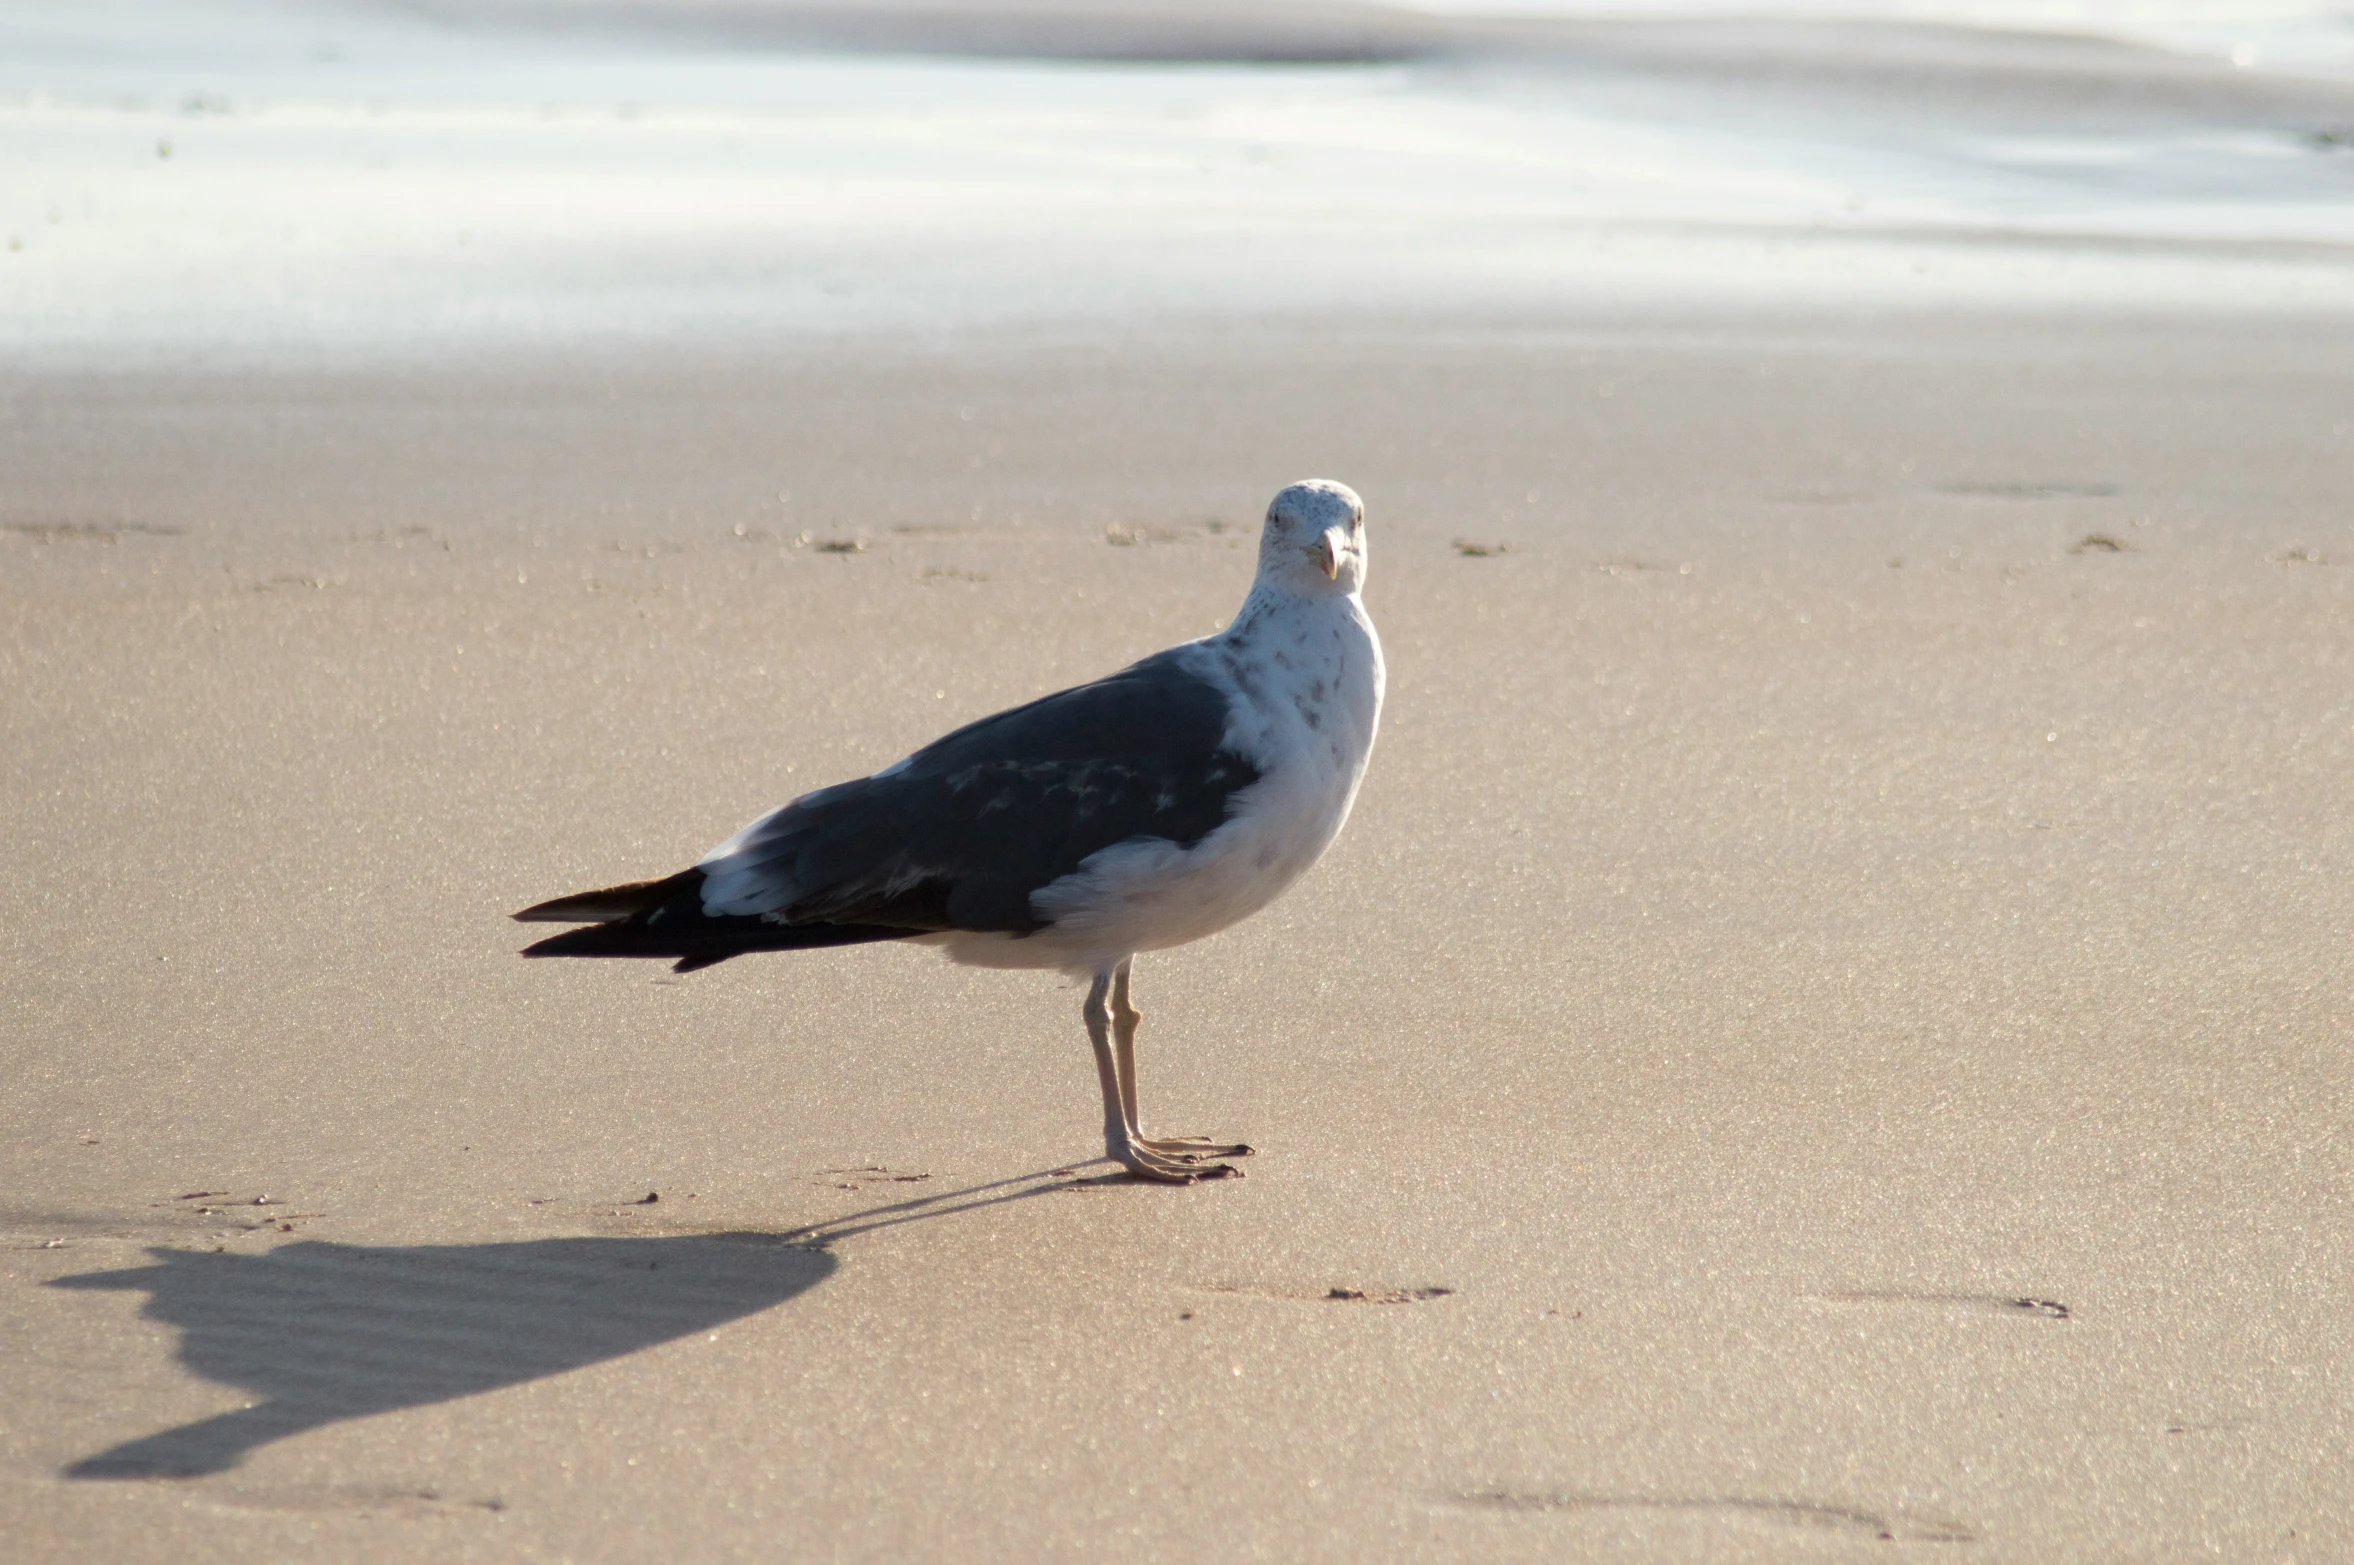 this is an image of a seagull on the beach